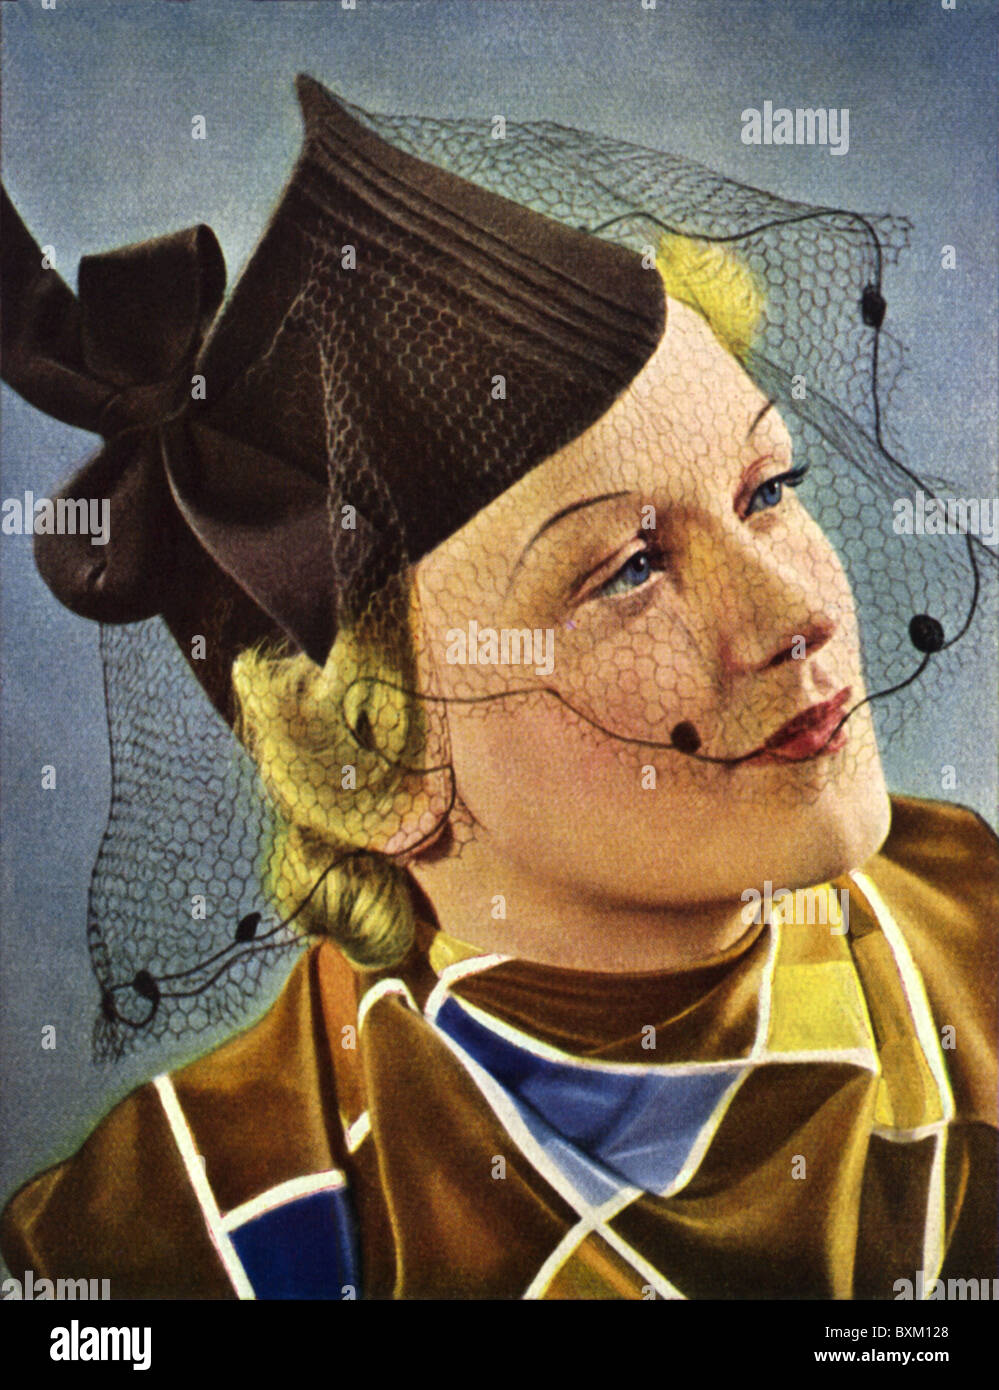 fashion, 1930s, ladie's fashion, hat, woman with felt cap, veil, 1930s,  30s, 20th century, historic, historical, blonde, autumn fashion, portrait,  people, women, female, Additional-Rights-Clearences-Not Available Stock  Photo - Alamy